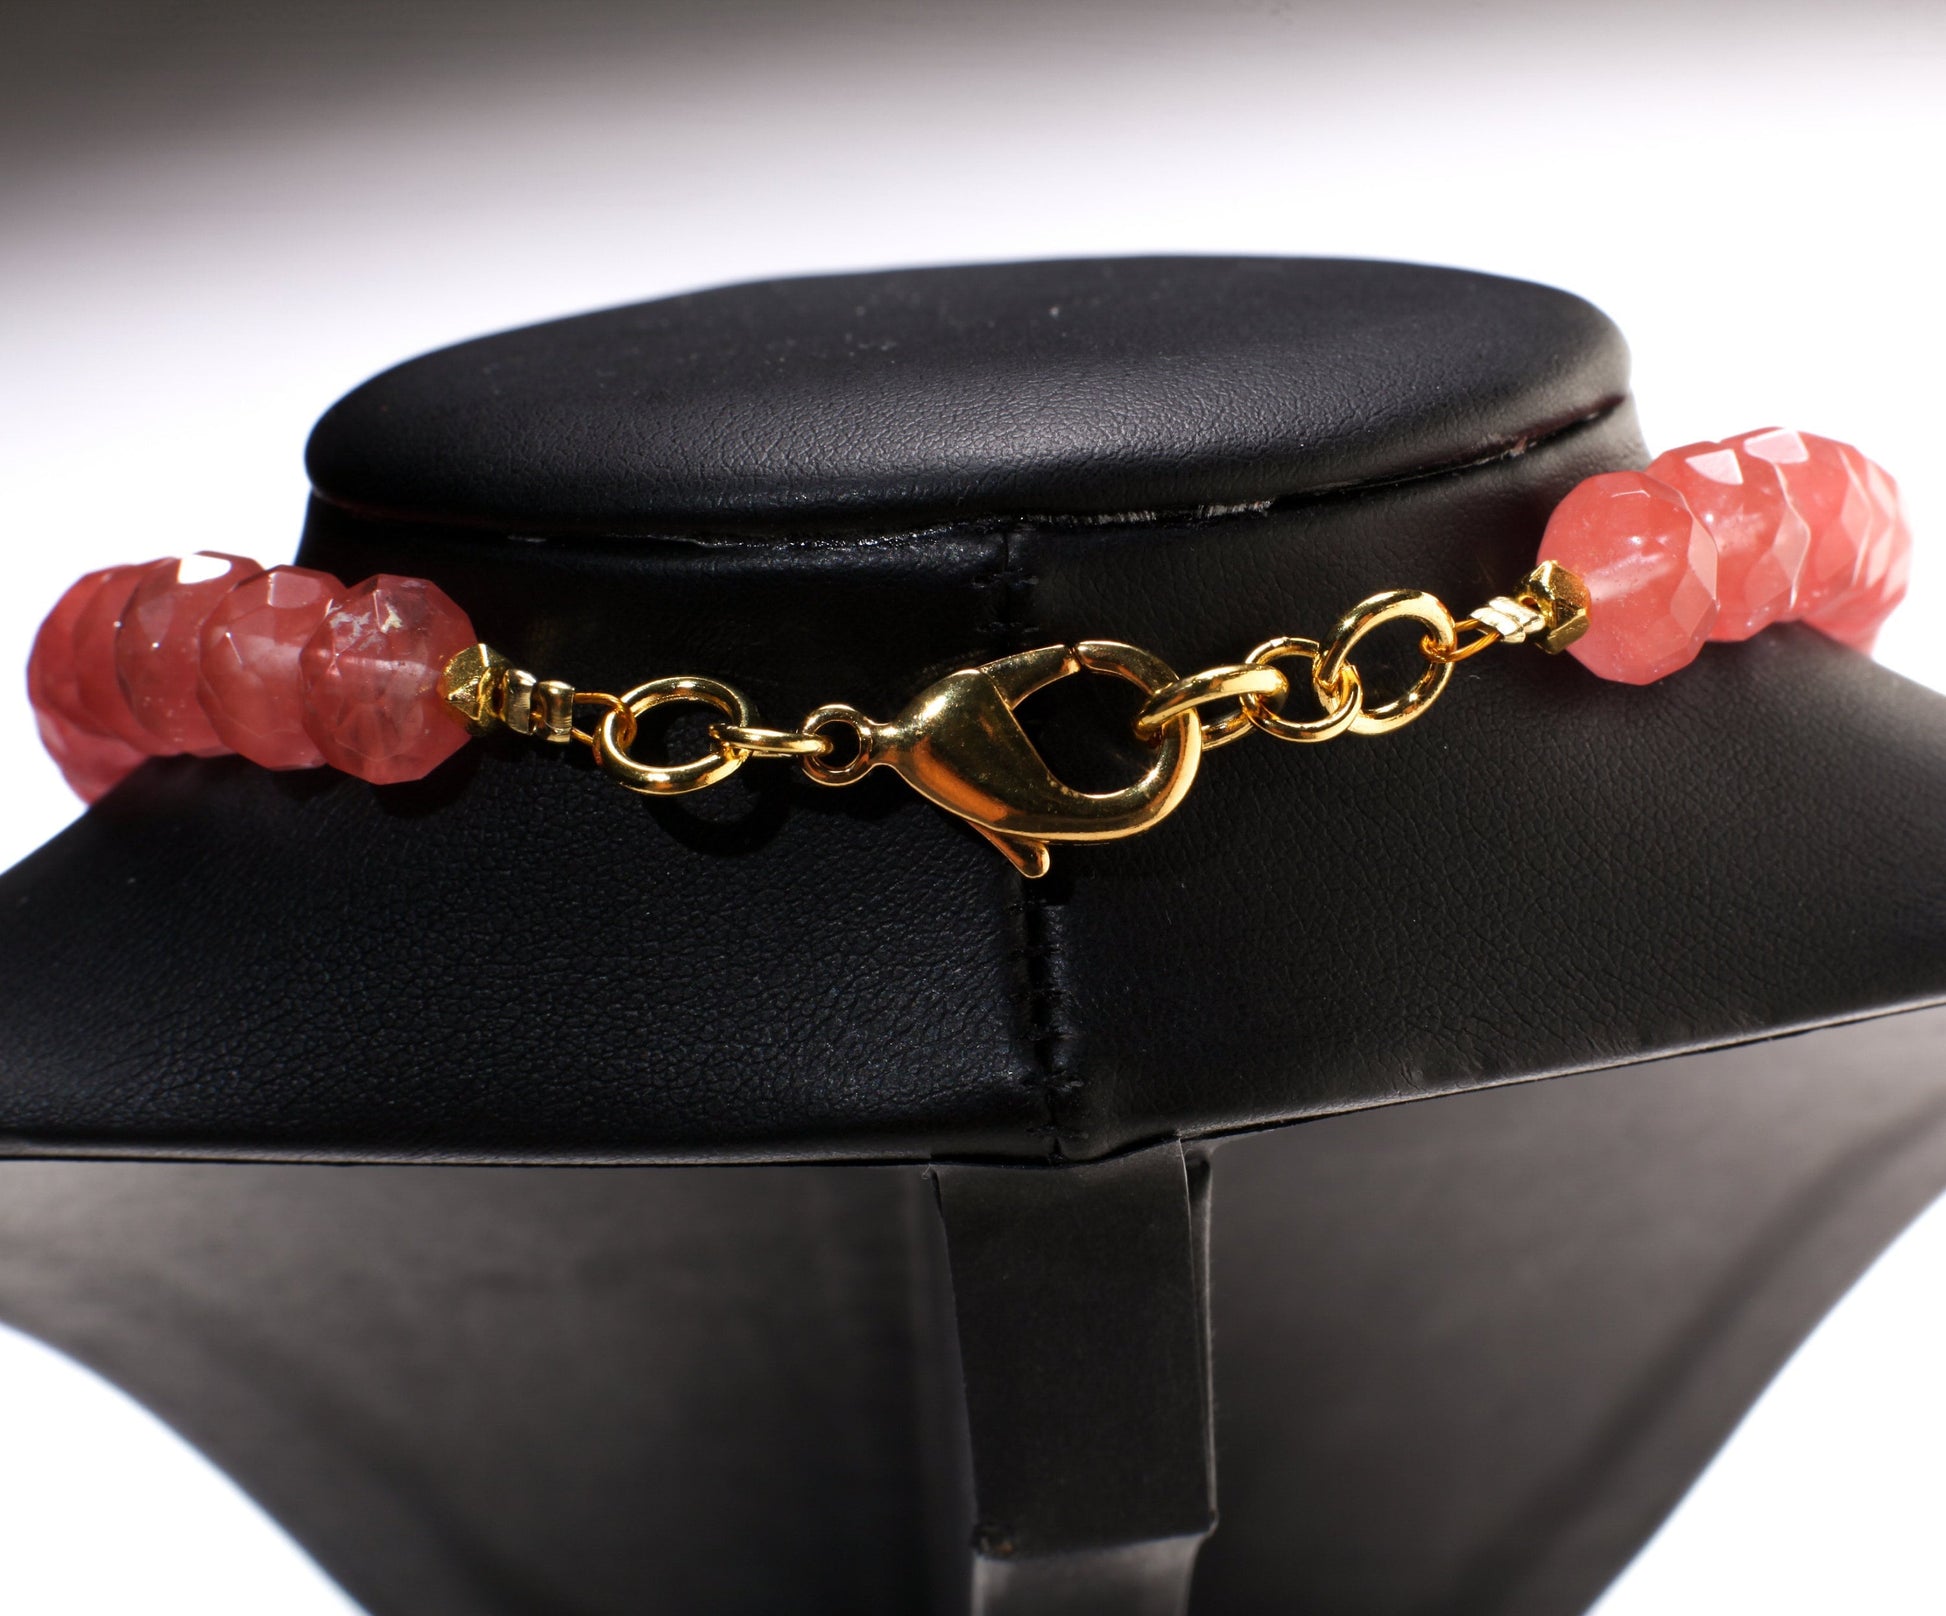 Watermelon Quartz Graduated faceted large 10-20mm Rondelle, Accents with Gold Faceted Spacer Beads 18.5&quot; Necklace.Gift